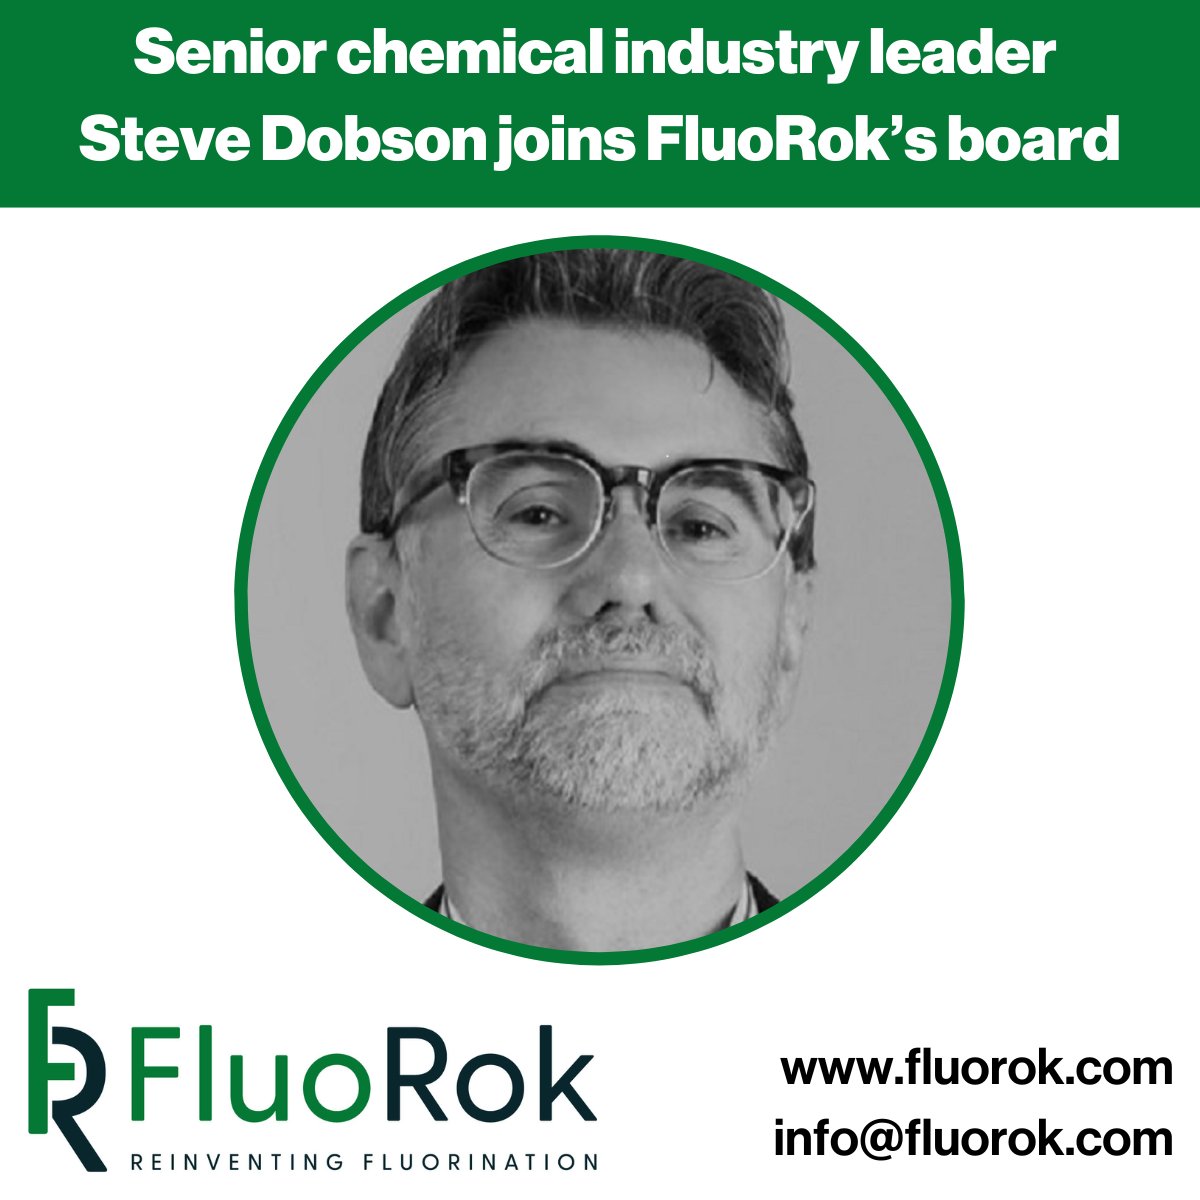 @Fluo_Rok announces appointment of senior chemical industry leader, Steve Dobson as a non-executive director. His experience will be critical in commercializing FluoRok's revolutionary technology to access fluorochemicals in a safe, clean, sustainable way. lnkd.in/e_hN5zH7